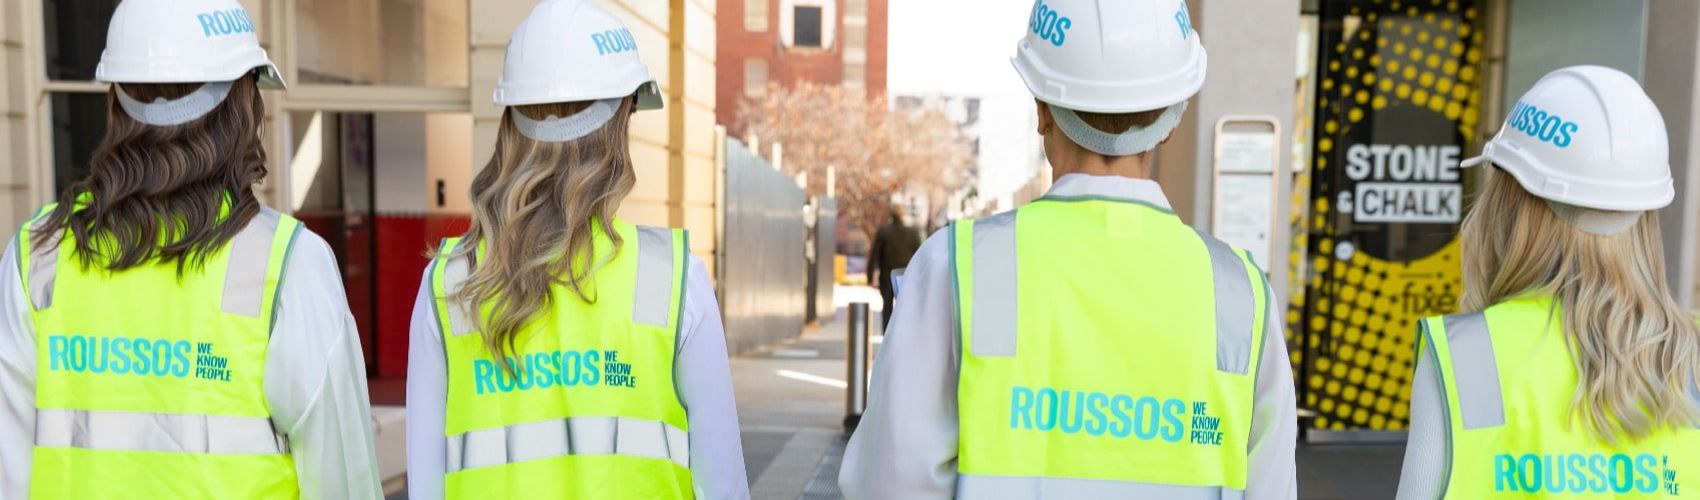 ROUSSOS is a name synonymous in South Australia with recruitment in the construction, architecture, engineering, civil and property industries.